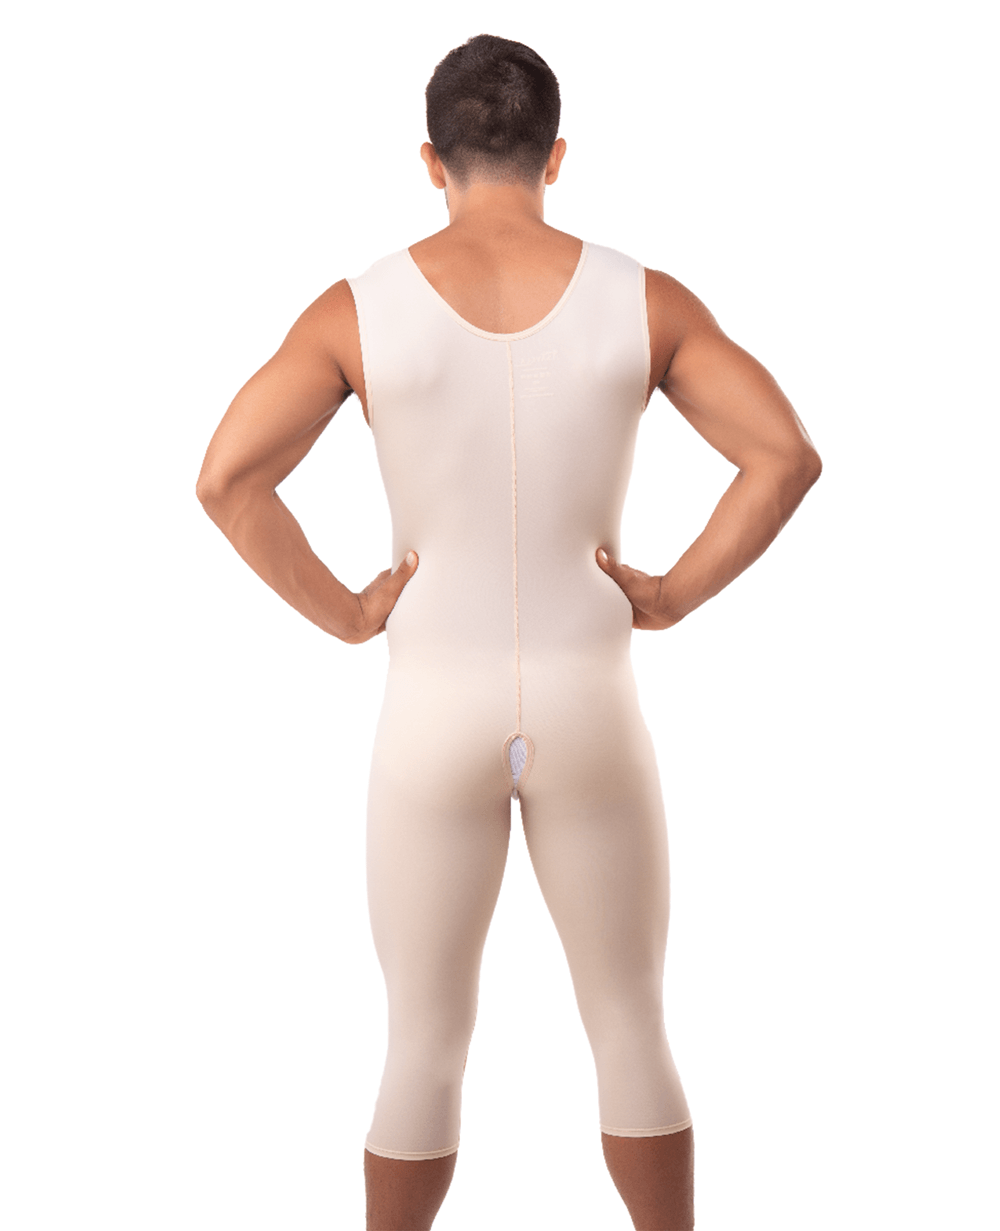 Male Full Body Below the Knee Length Abdominal Cosmetic Surgery Compression Garment with Zipper (Sleeveless) (MG02-BK) - Isavela Compression Garments